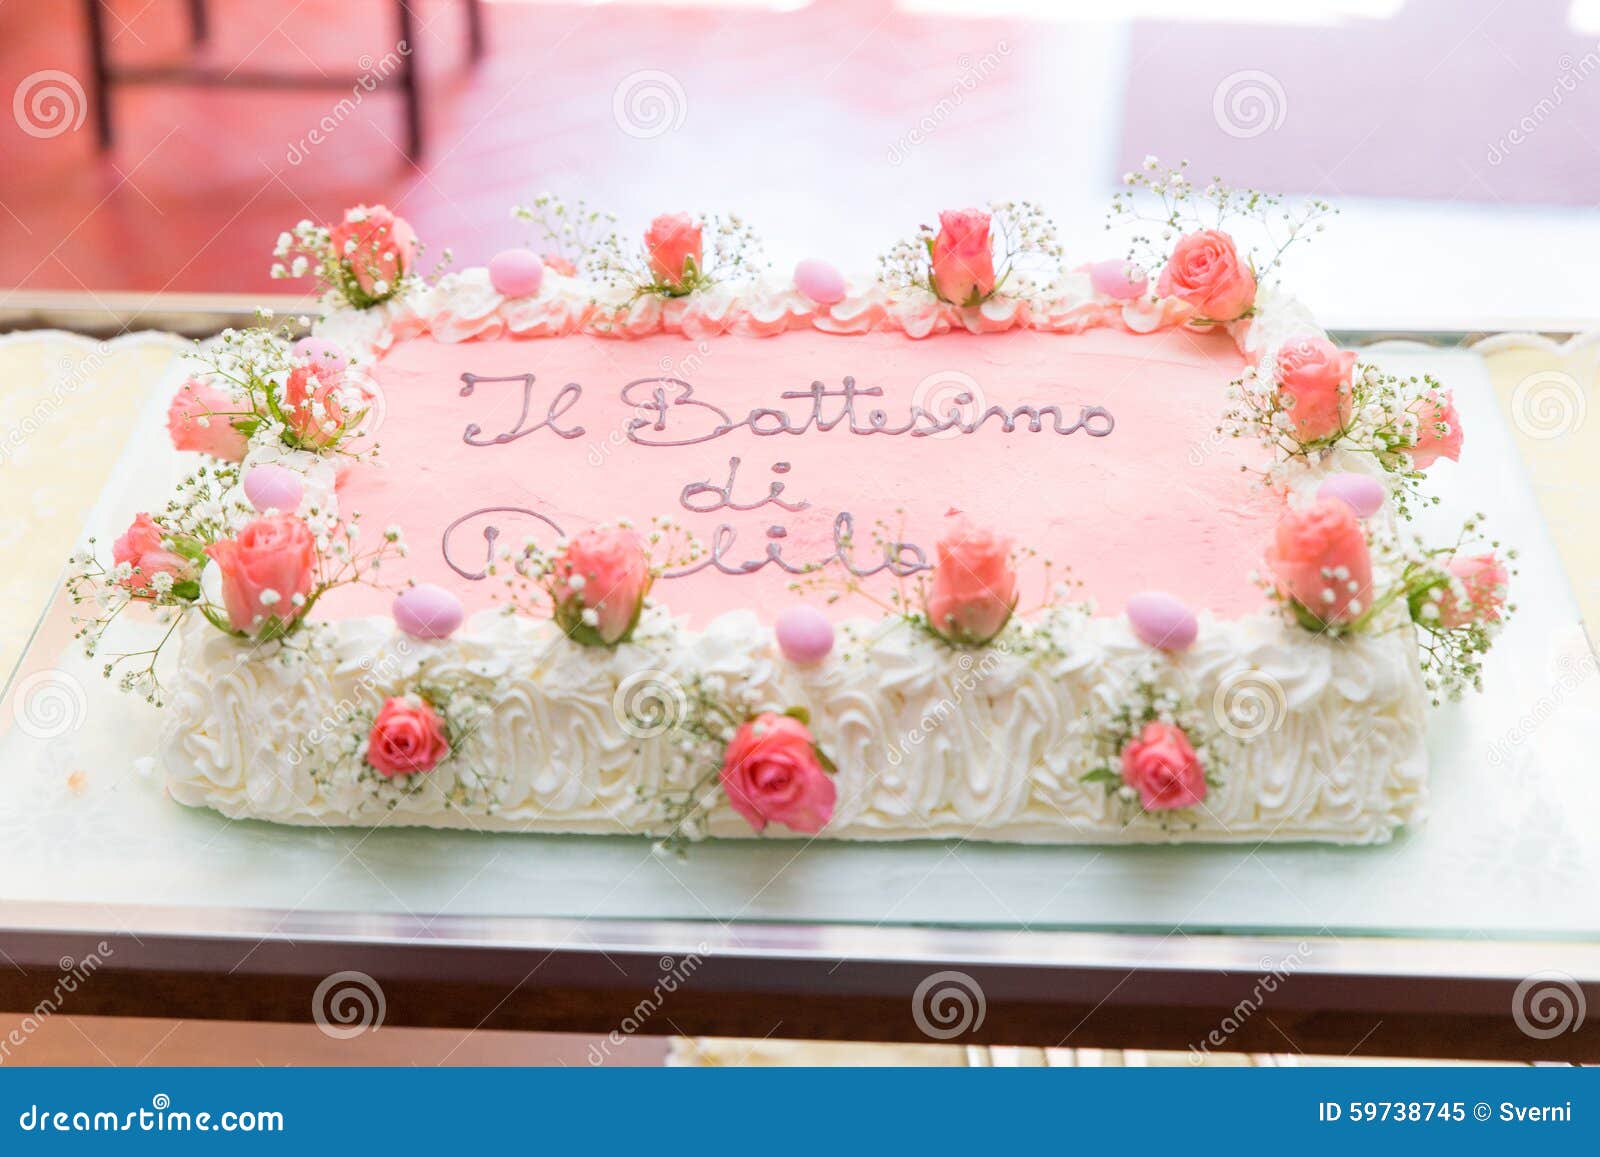 fruit cake decorated with flowers